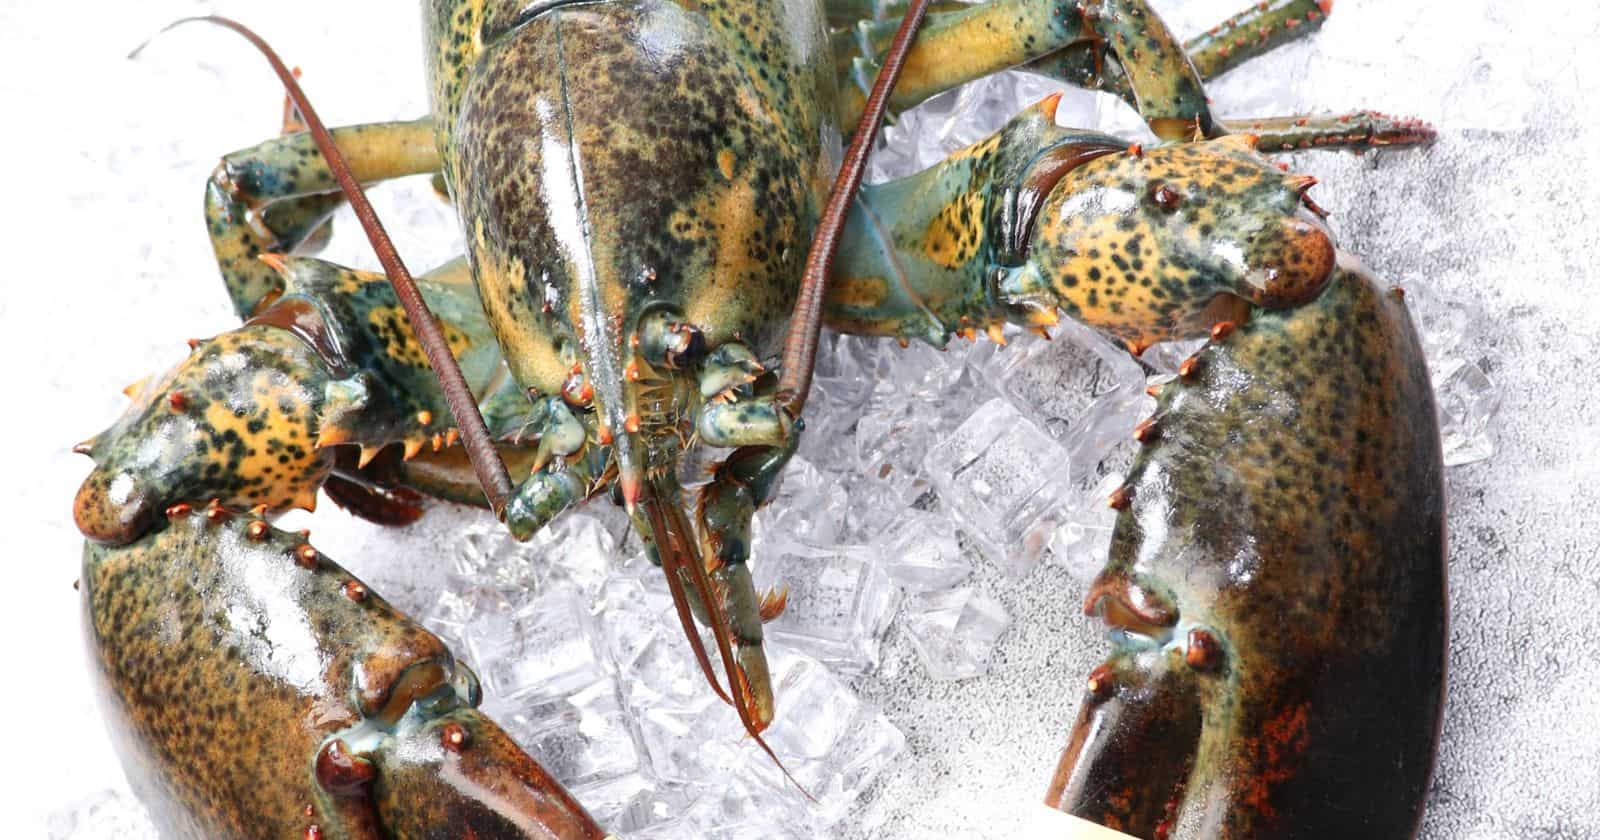 How Long Can Live Lobster Stay On Ice